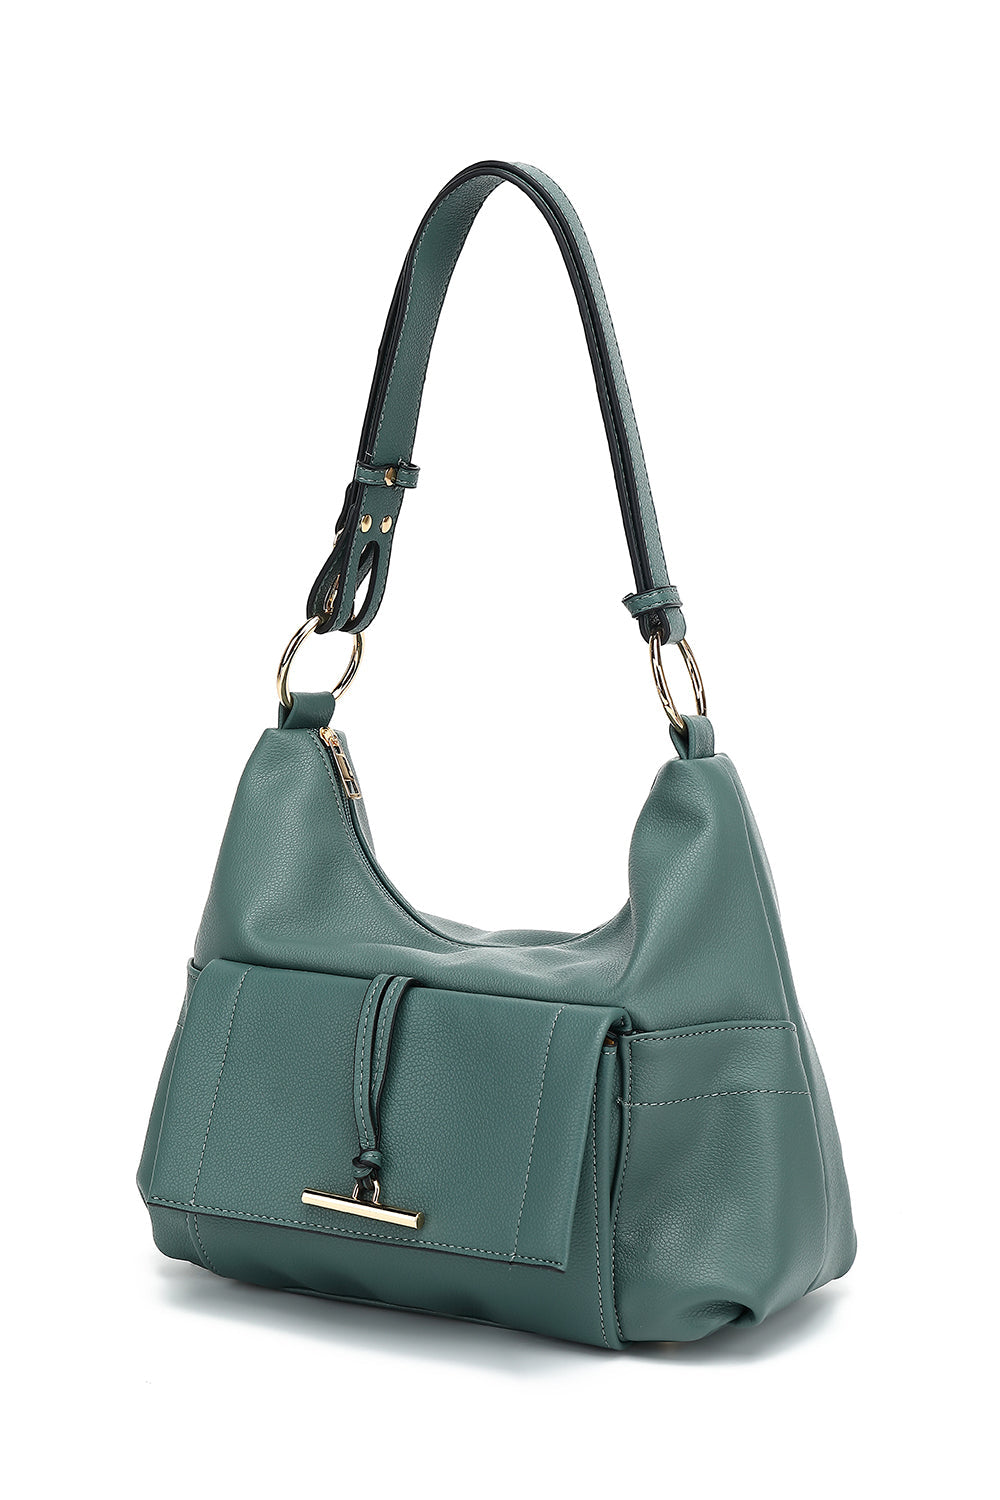 Double Top Zip Front Pocket Toggle Hardware Hobo